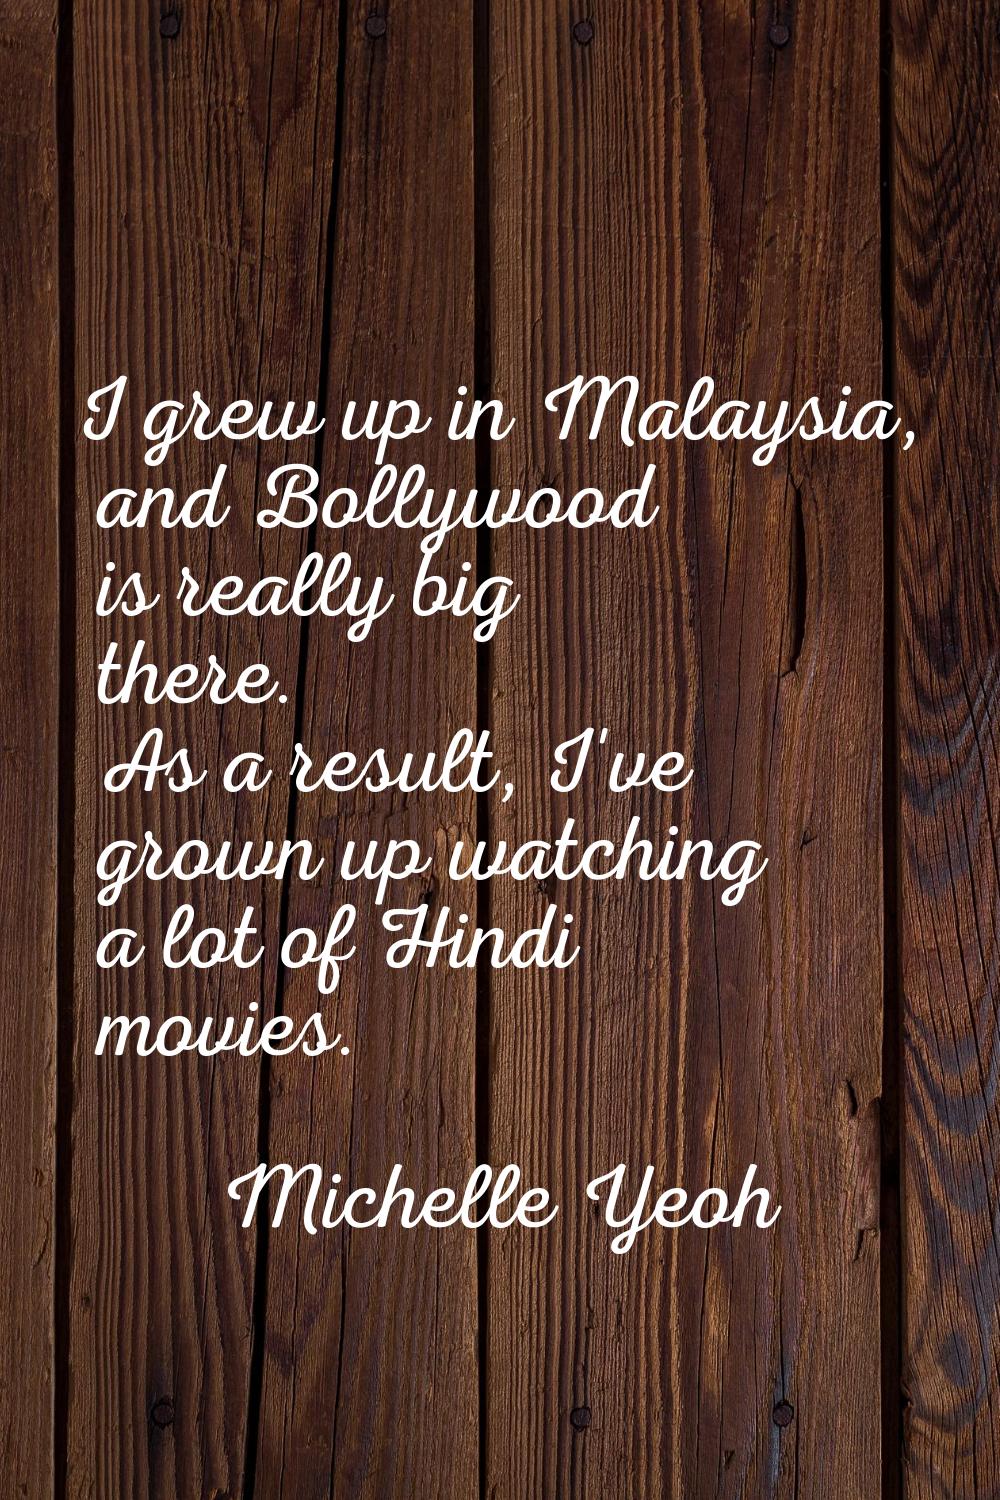 I grew up in Malaysia, and Bollywood is really big there. As a result, I've grown up watching a lot